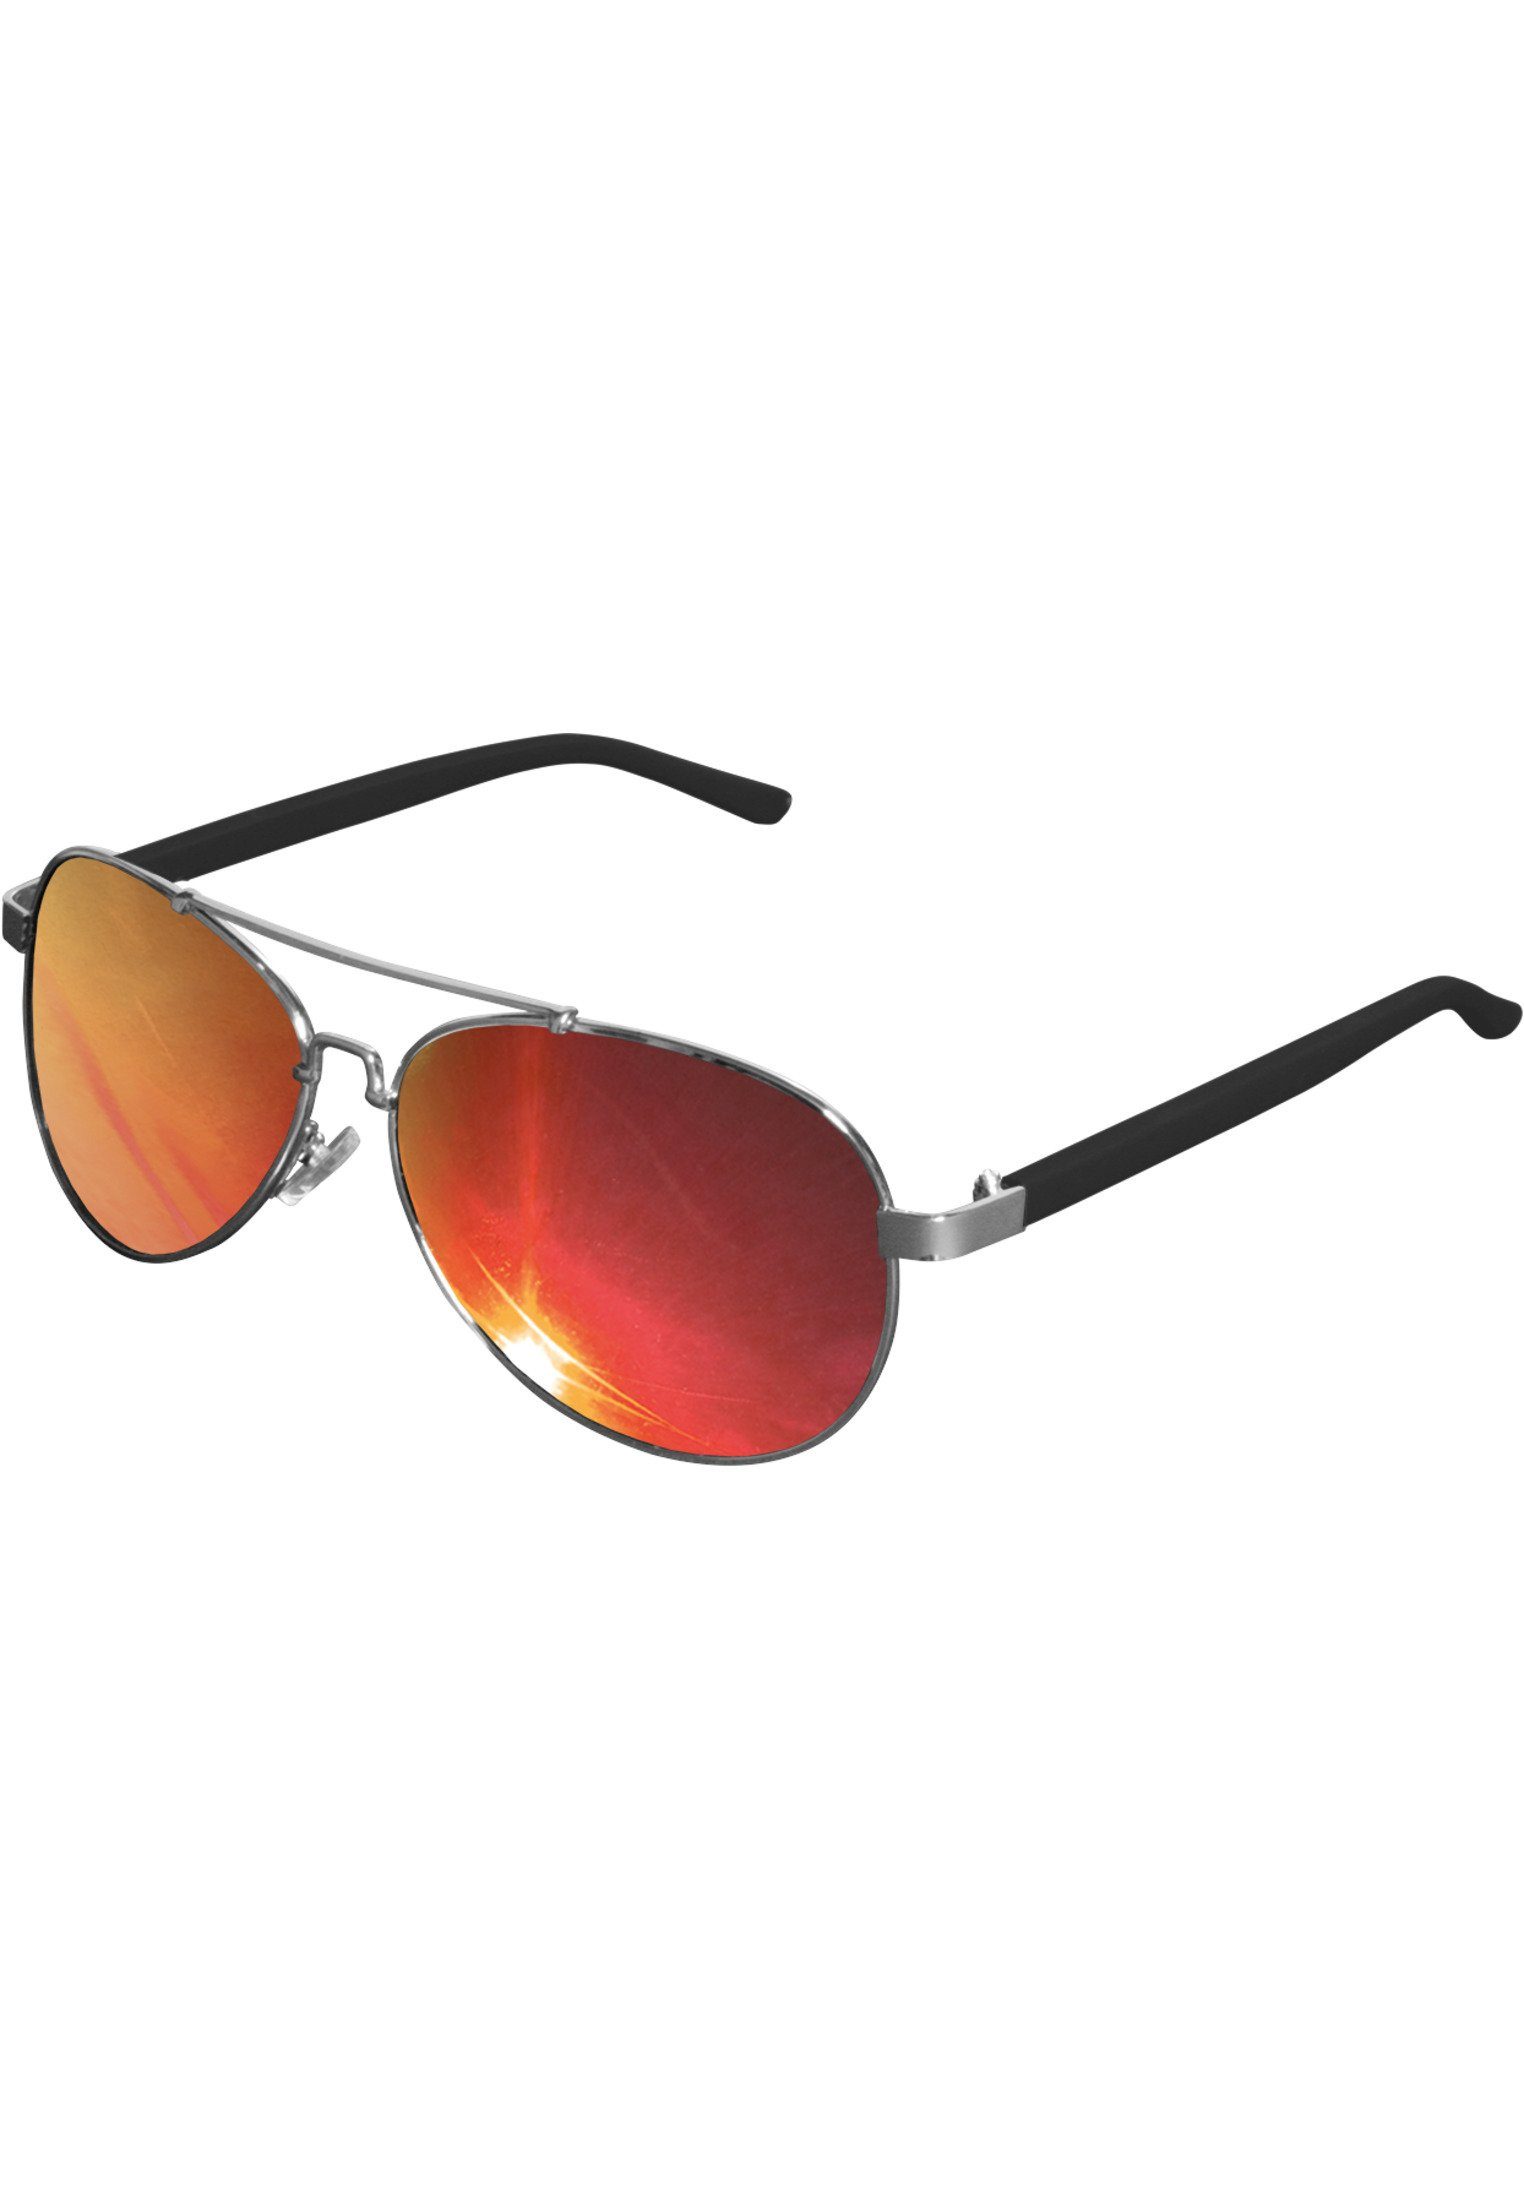 Sunglasses Mirror Accessoires silver/red Sonnenbrille MSTRDS Mumbo